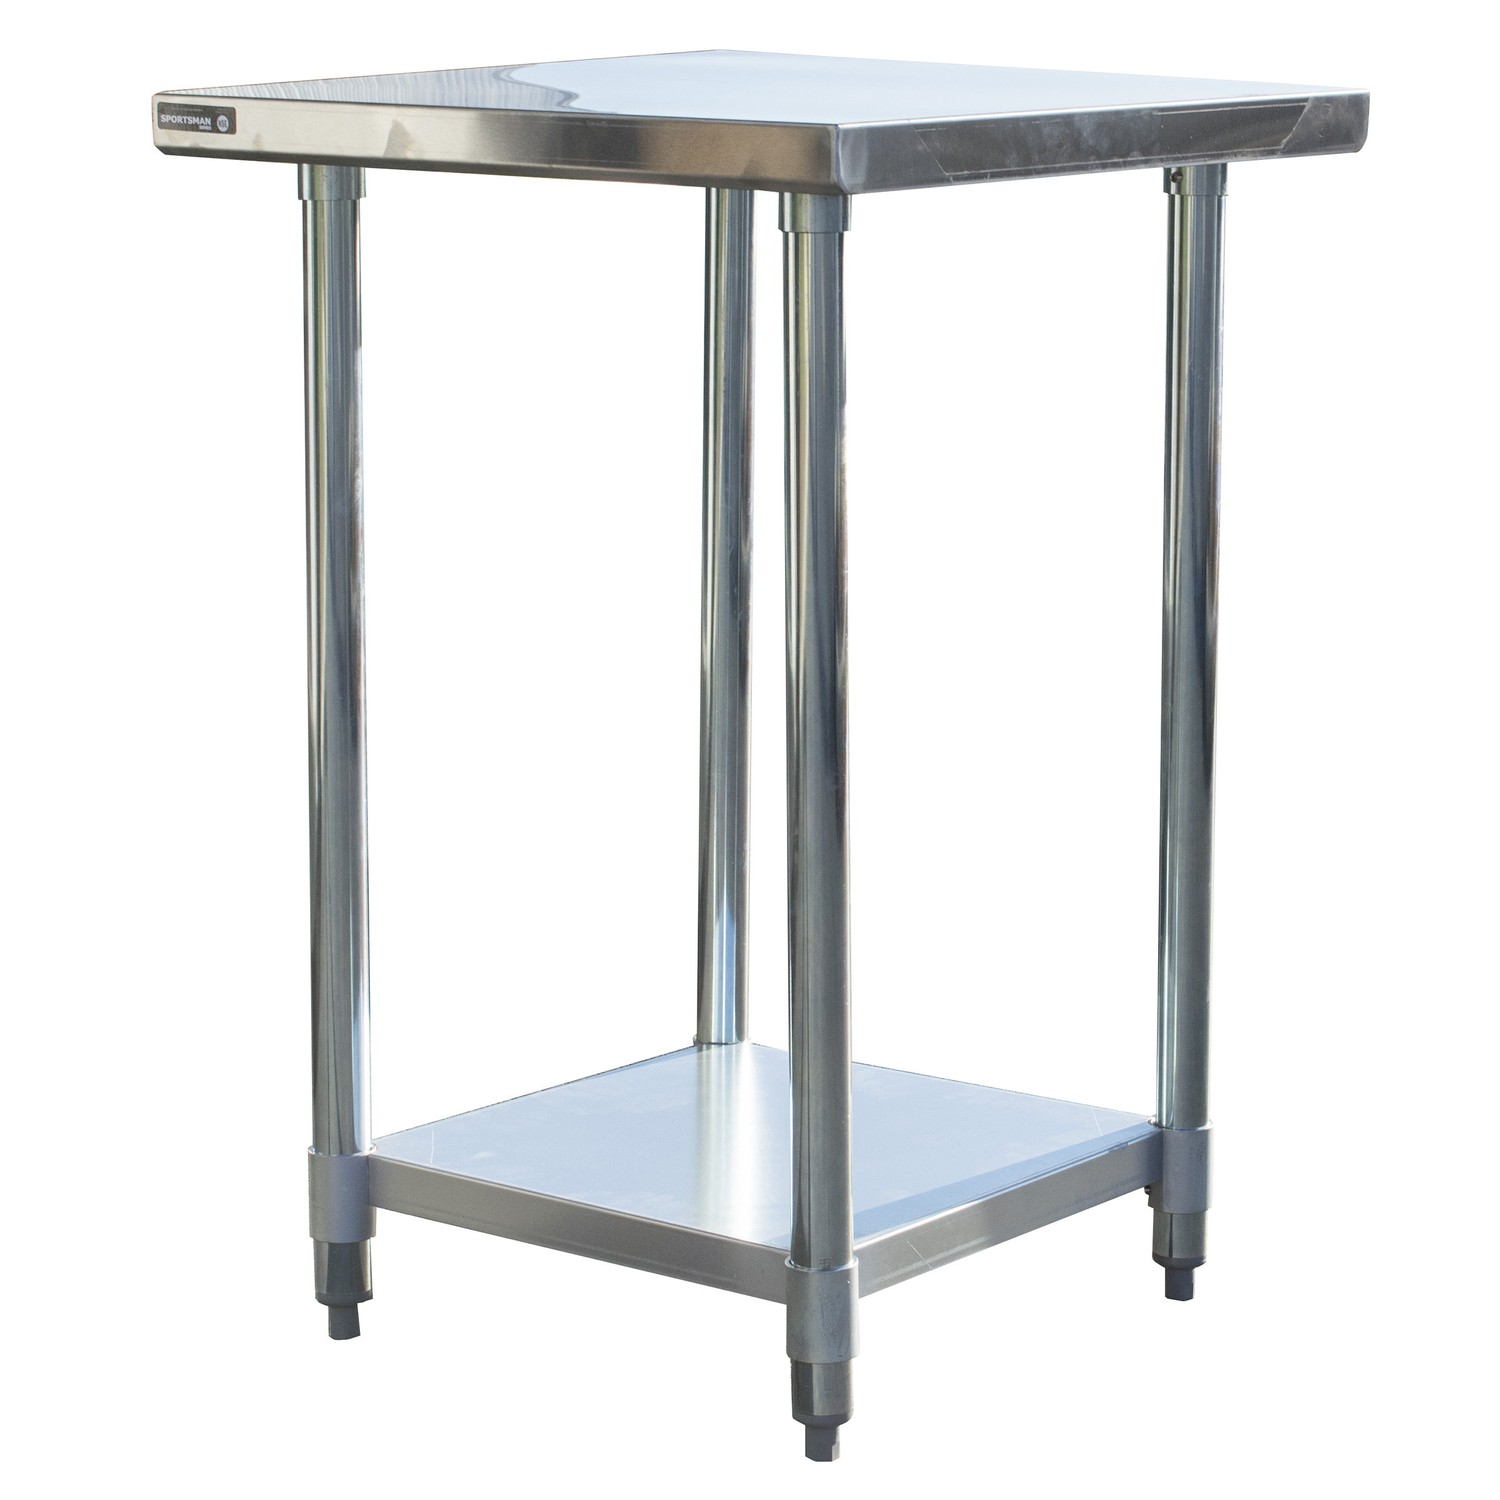 Sportsman Series Stainless Steel Work Table 24 x 24 Inches